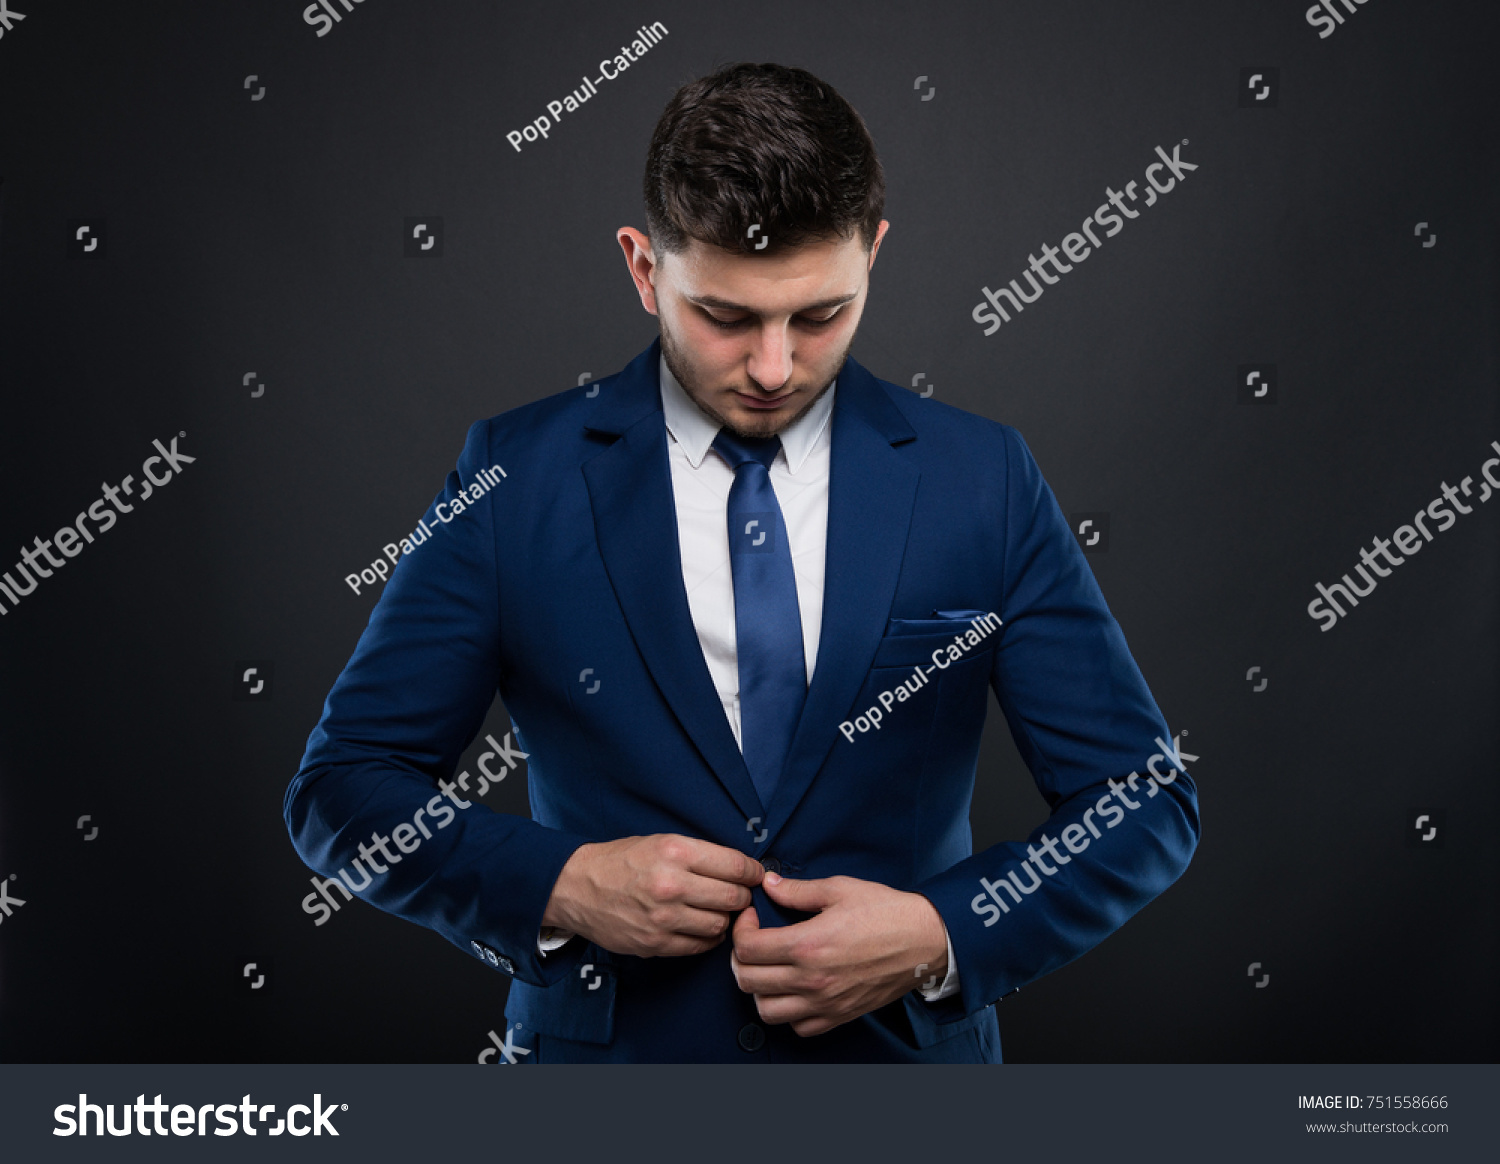 Handsome Businessman Buttoning His Suit Jacket Stock Photo 751558666